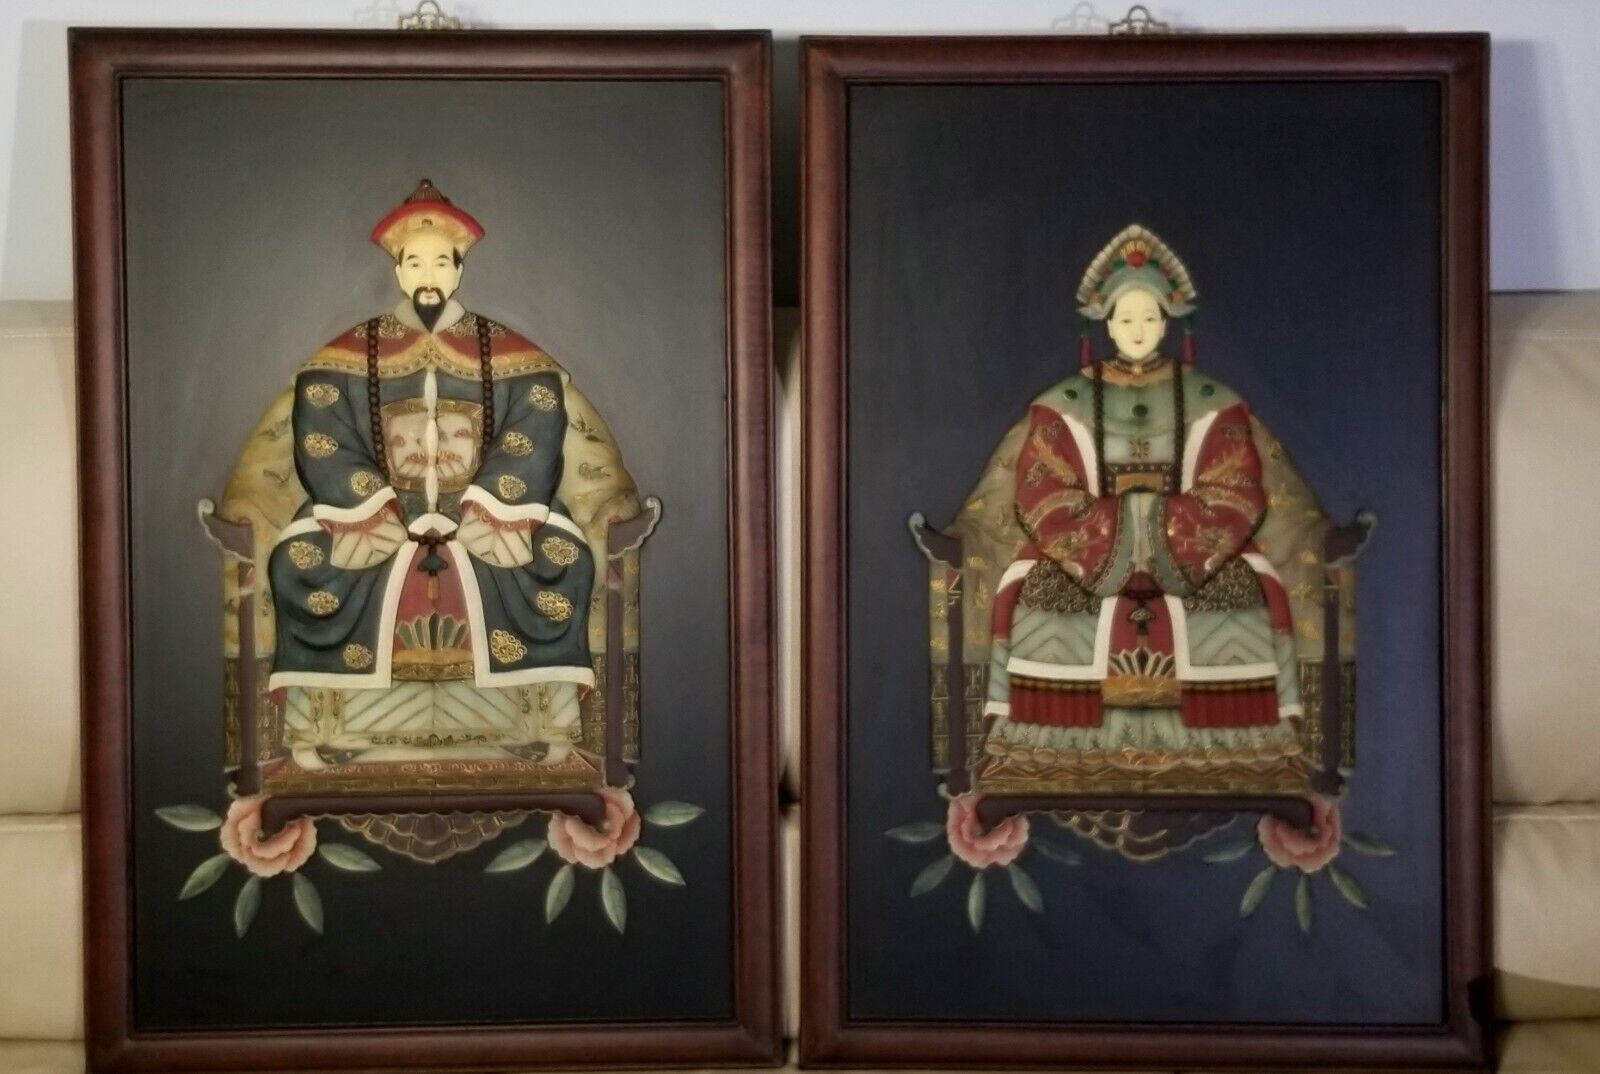 Pair Large Chinese Carved Hardstone Relief Emperor & Empress Portraits by Xu Zhe